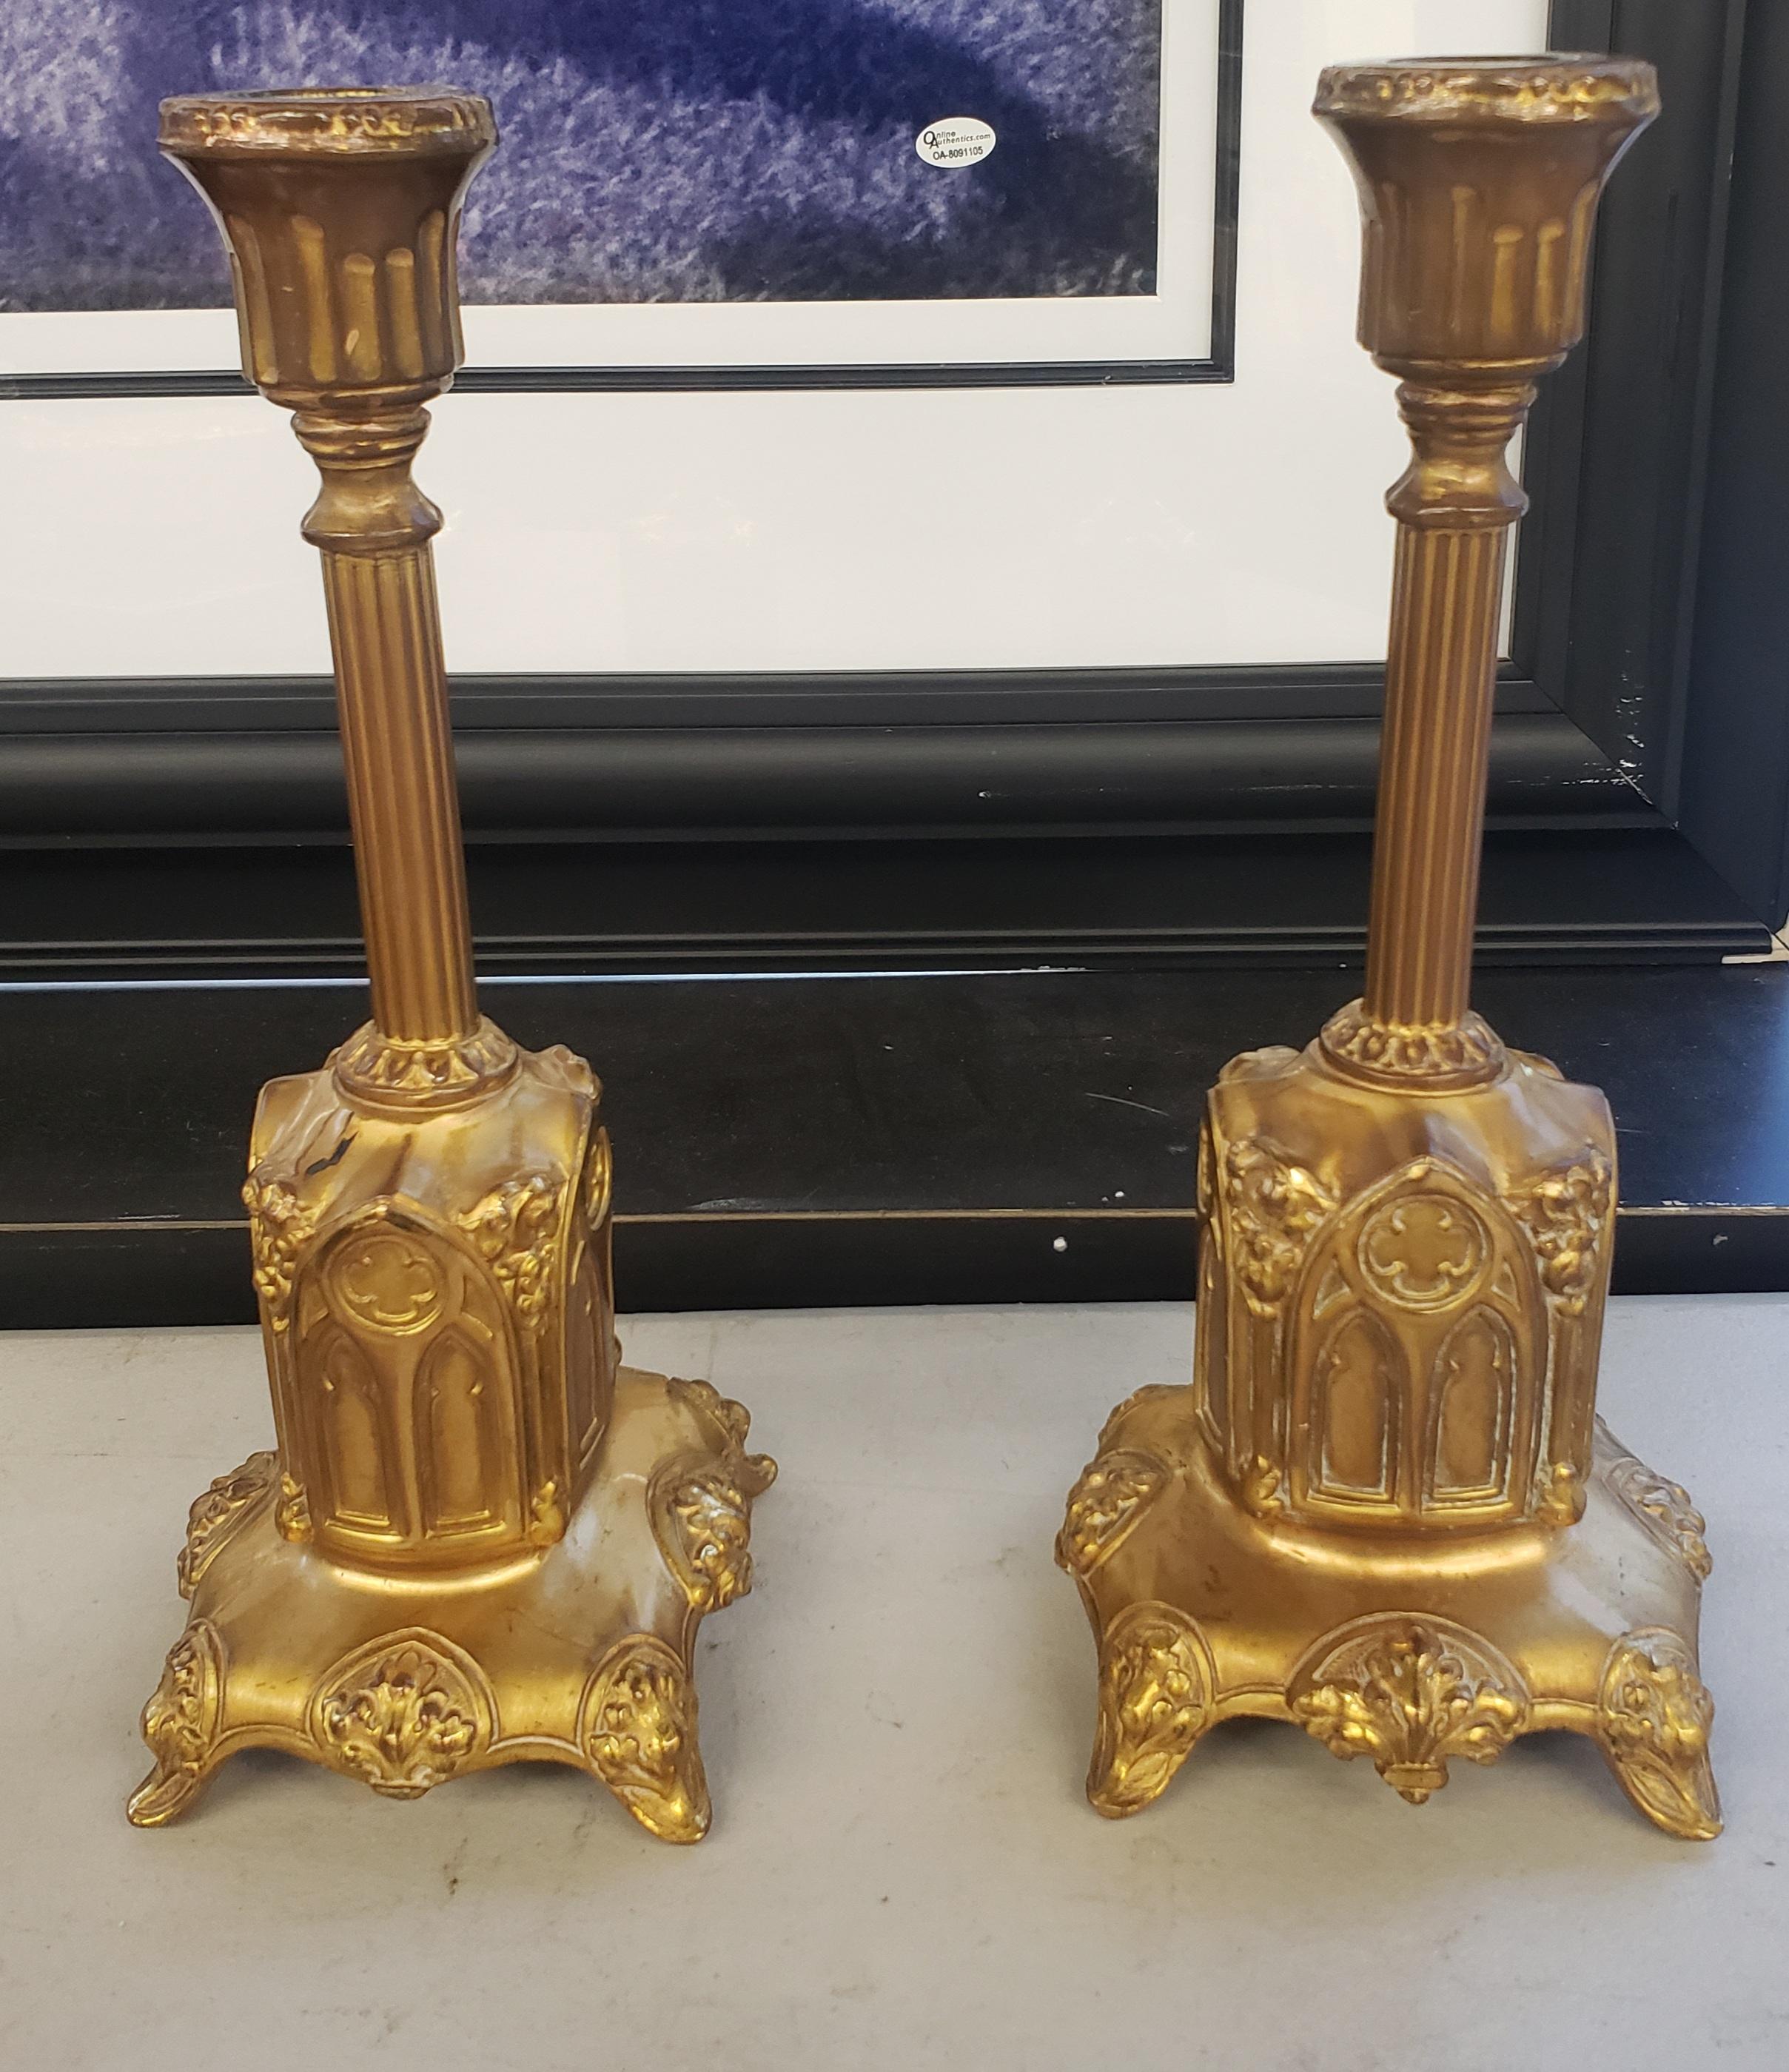 A unique pair of gilt ormolu patinated metal candleholders in the ecclesiastical style.
Good antique condition.